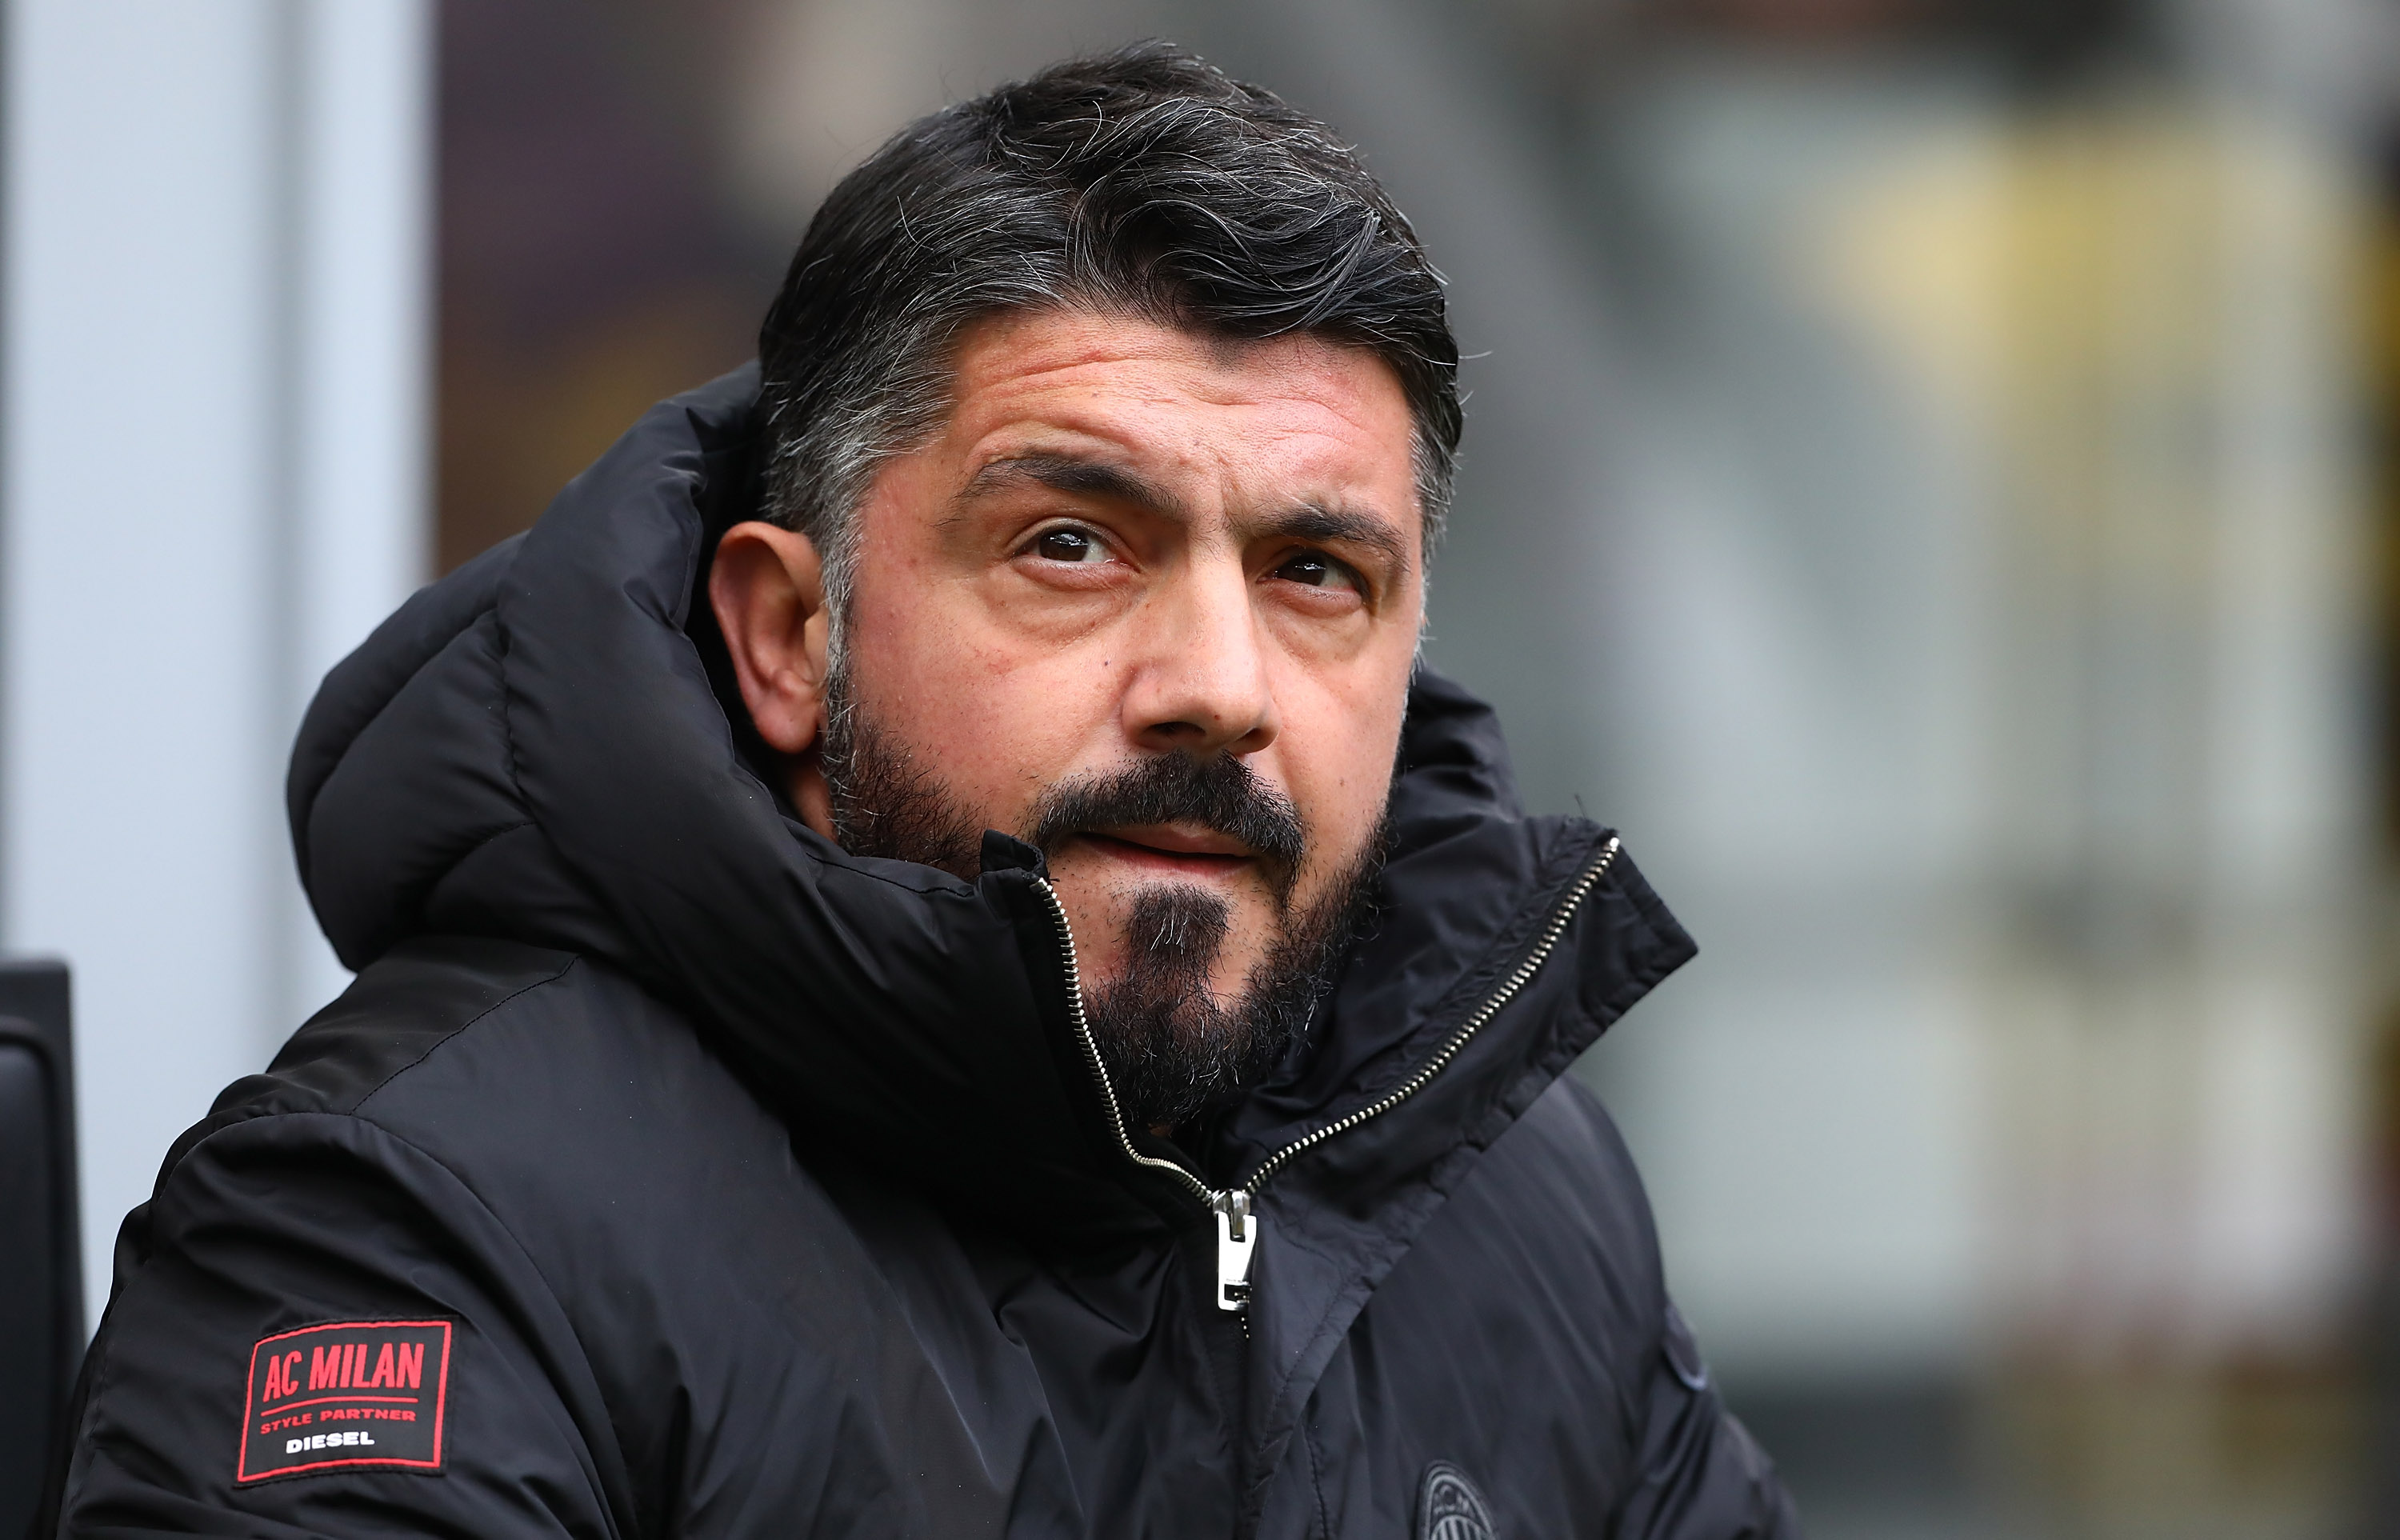 MILAN, ITALY - DECEMBER 02:  AC Milan coach Gennaro Gattuso looks on before the Serie A match between AC Milan and Parma Calcio at Stadio Giuseppe Meazza on December 2, 2018 in Milan, Italy.  (Photo by Marco Luzzani/Getty Images)